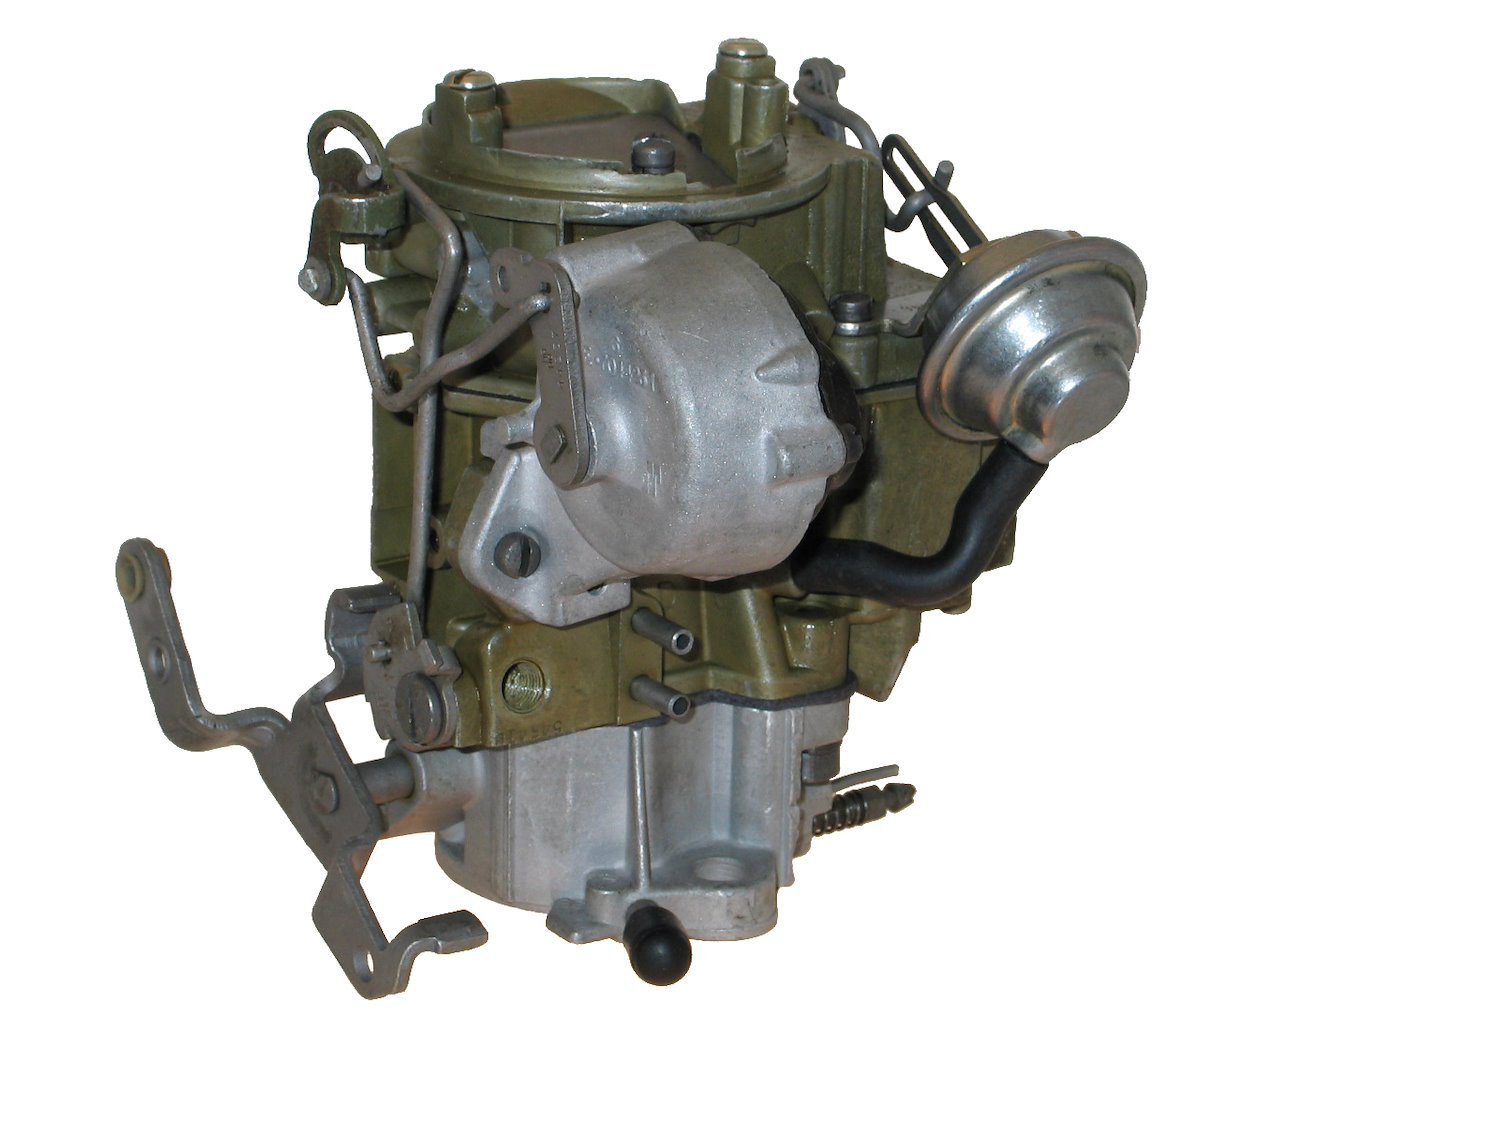 3-3531 Rochester Remanufactured Carburetor, 1ME, Heavy Duty-Style